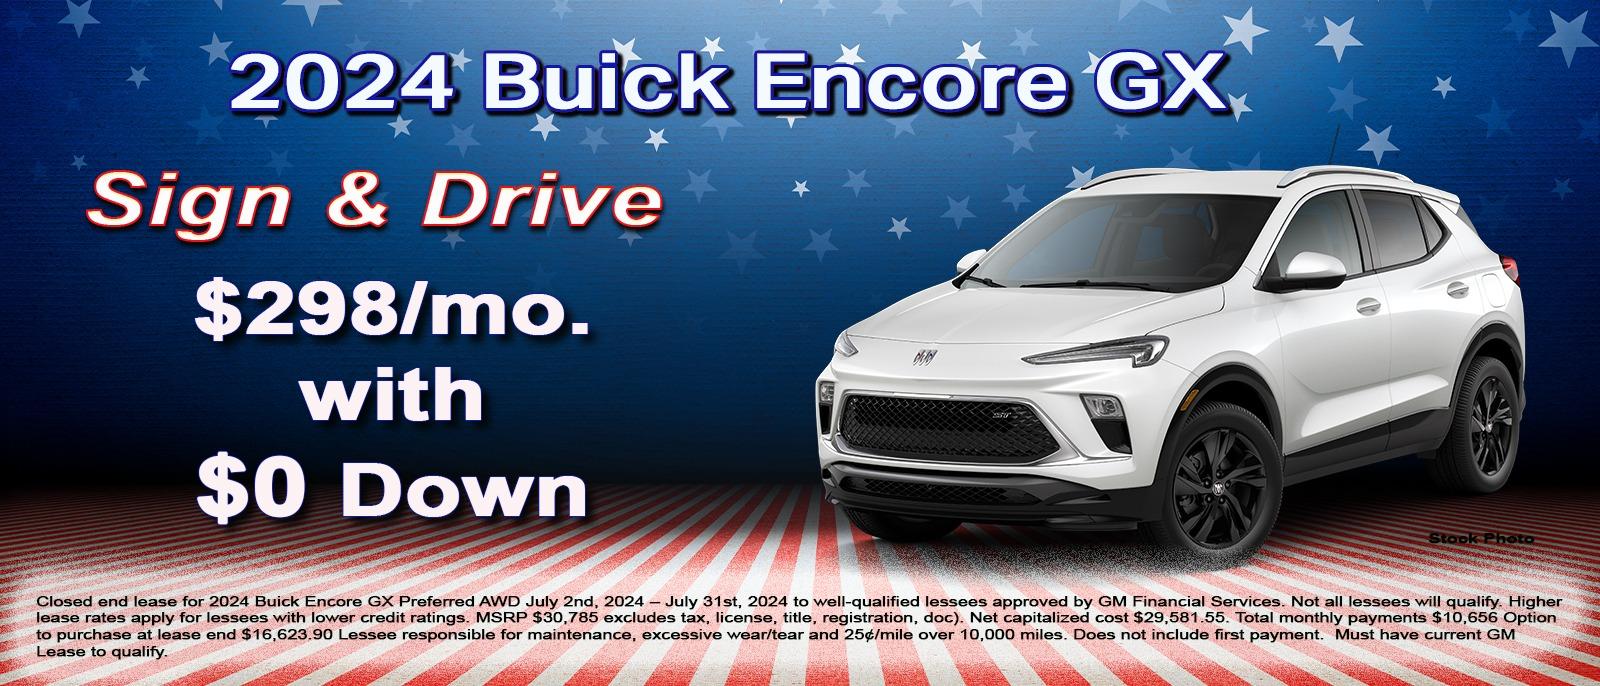 Sign and Drive lease on your new Buick Encore GX for $298 per month